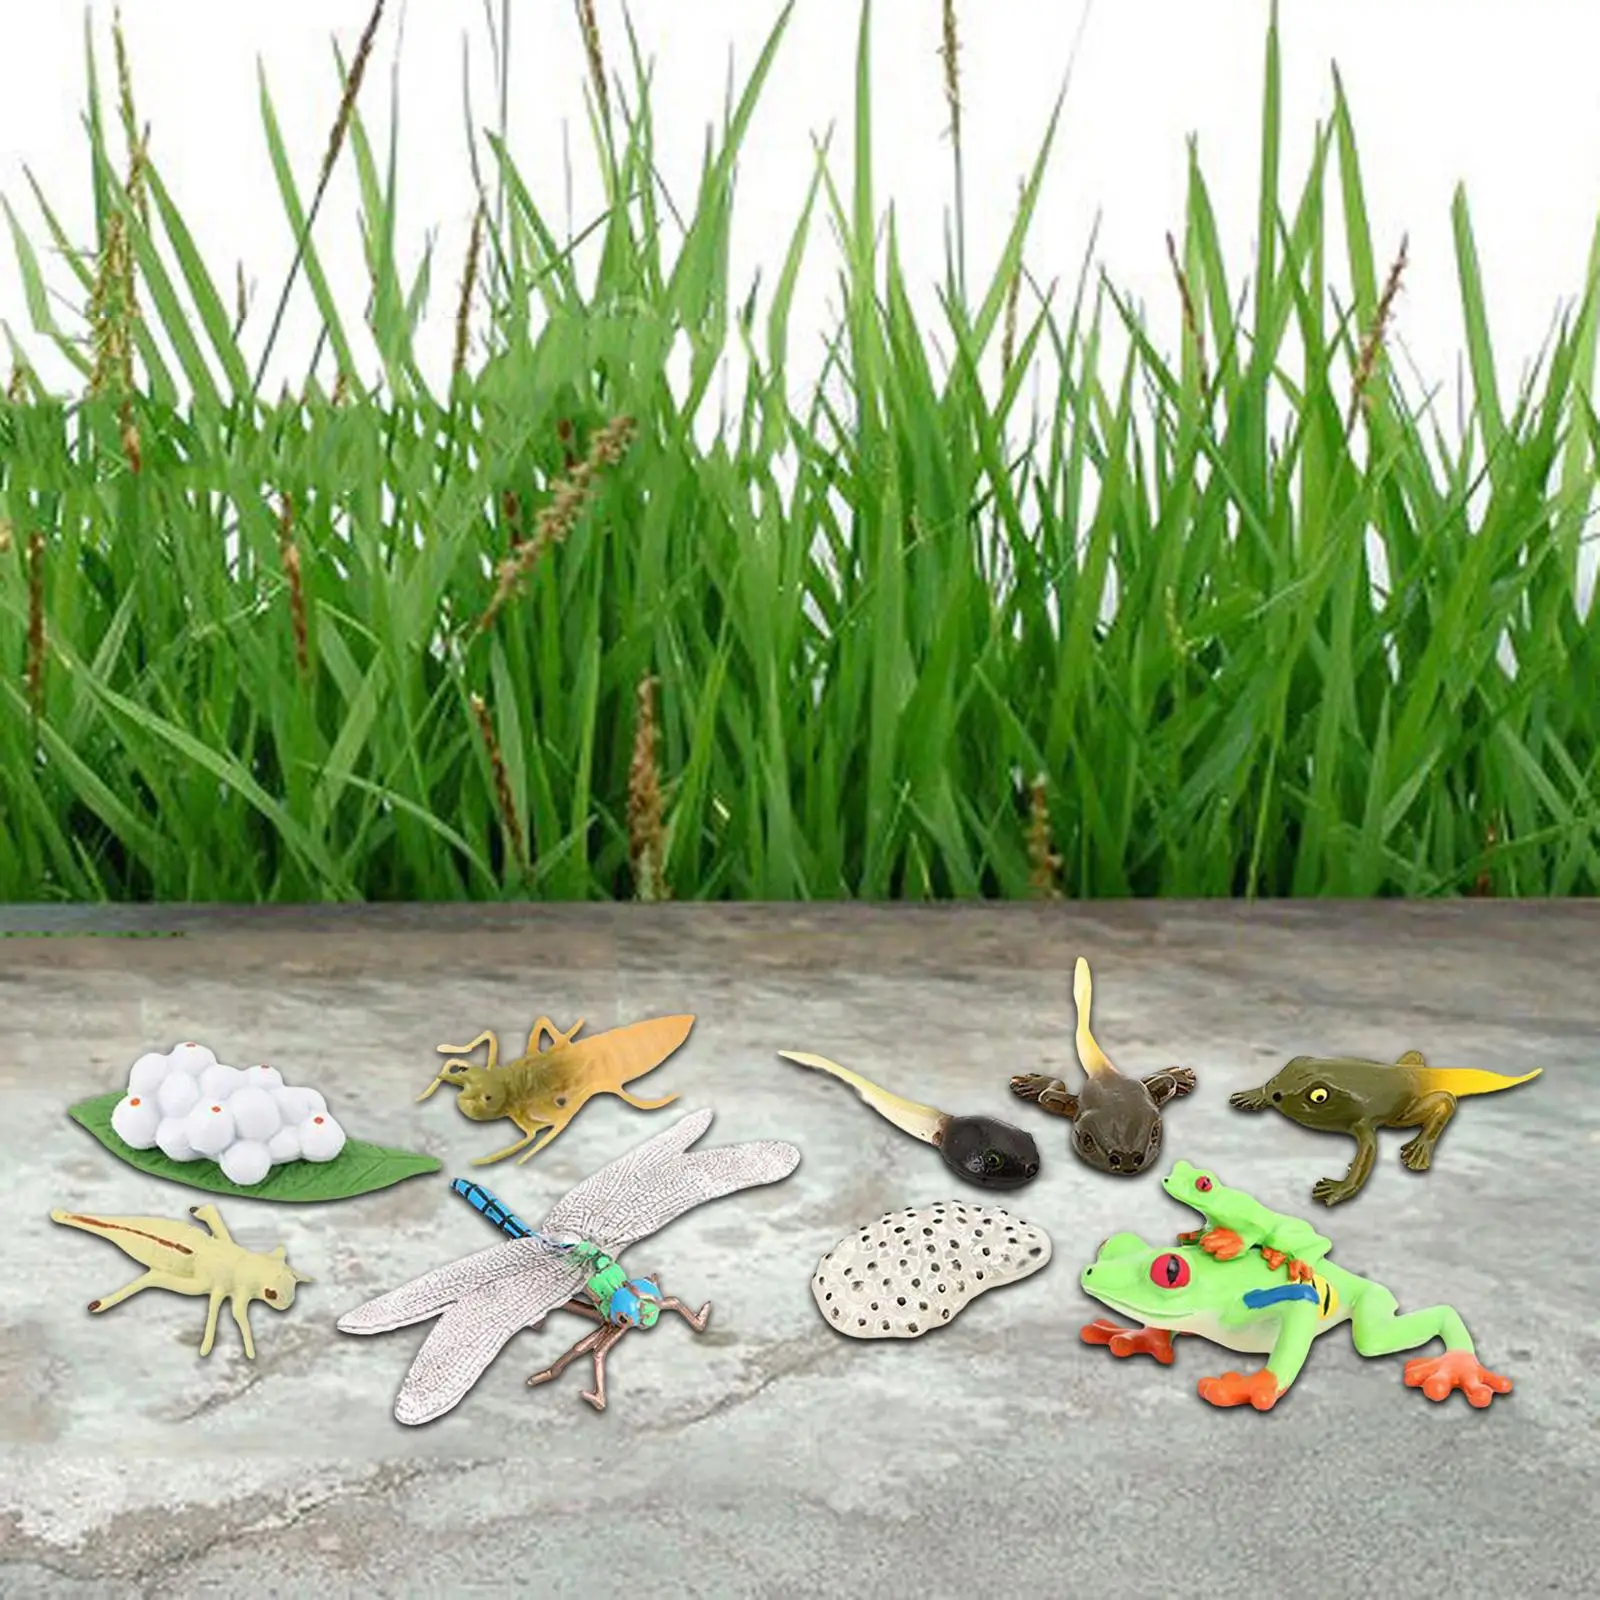 Life Cycle Figurines Toy Dragonfly Figures Educational for Party Favors Kids